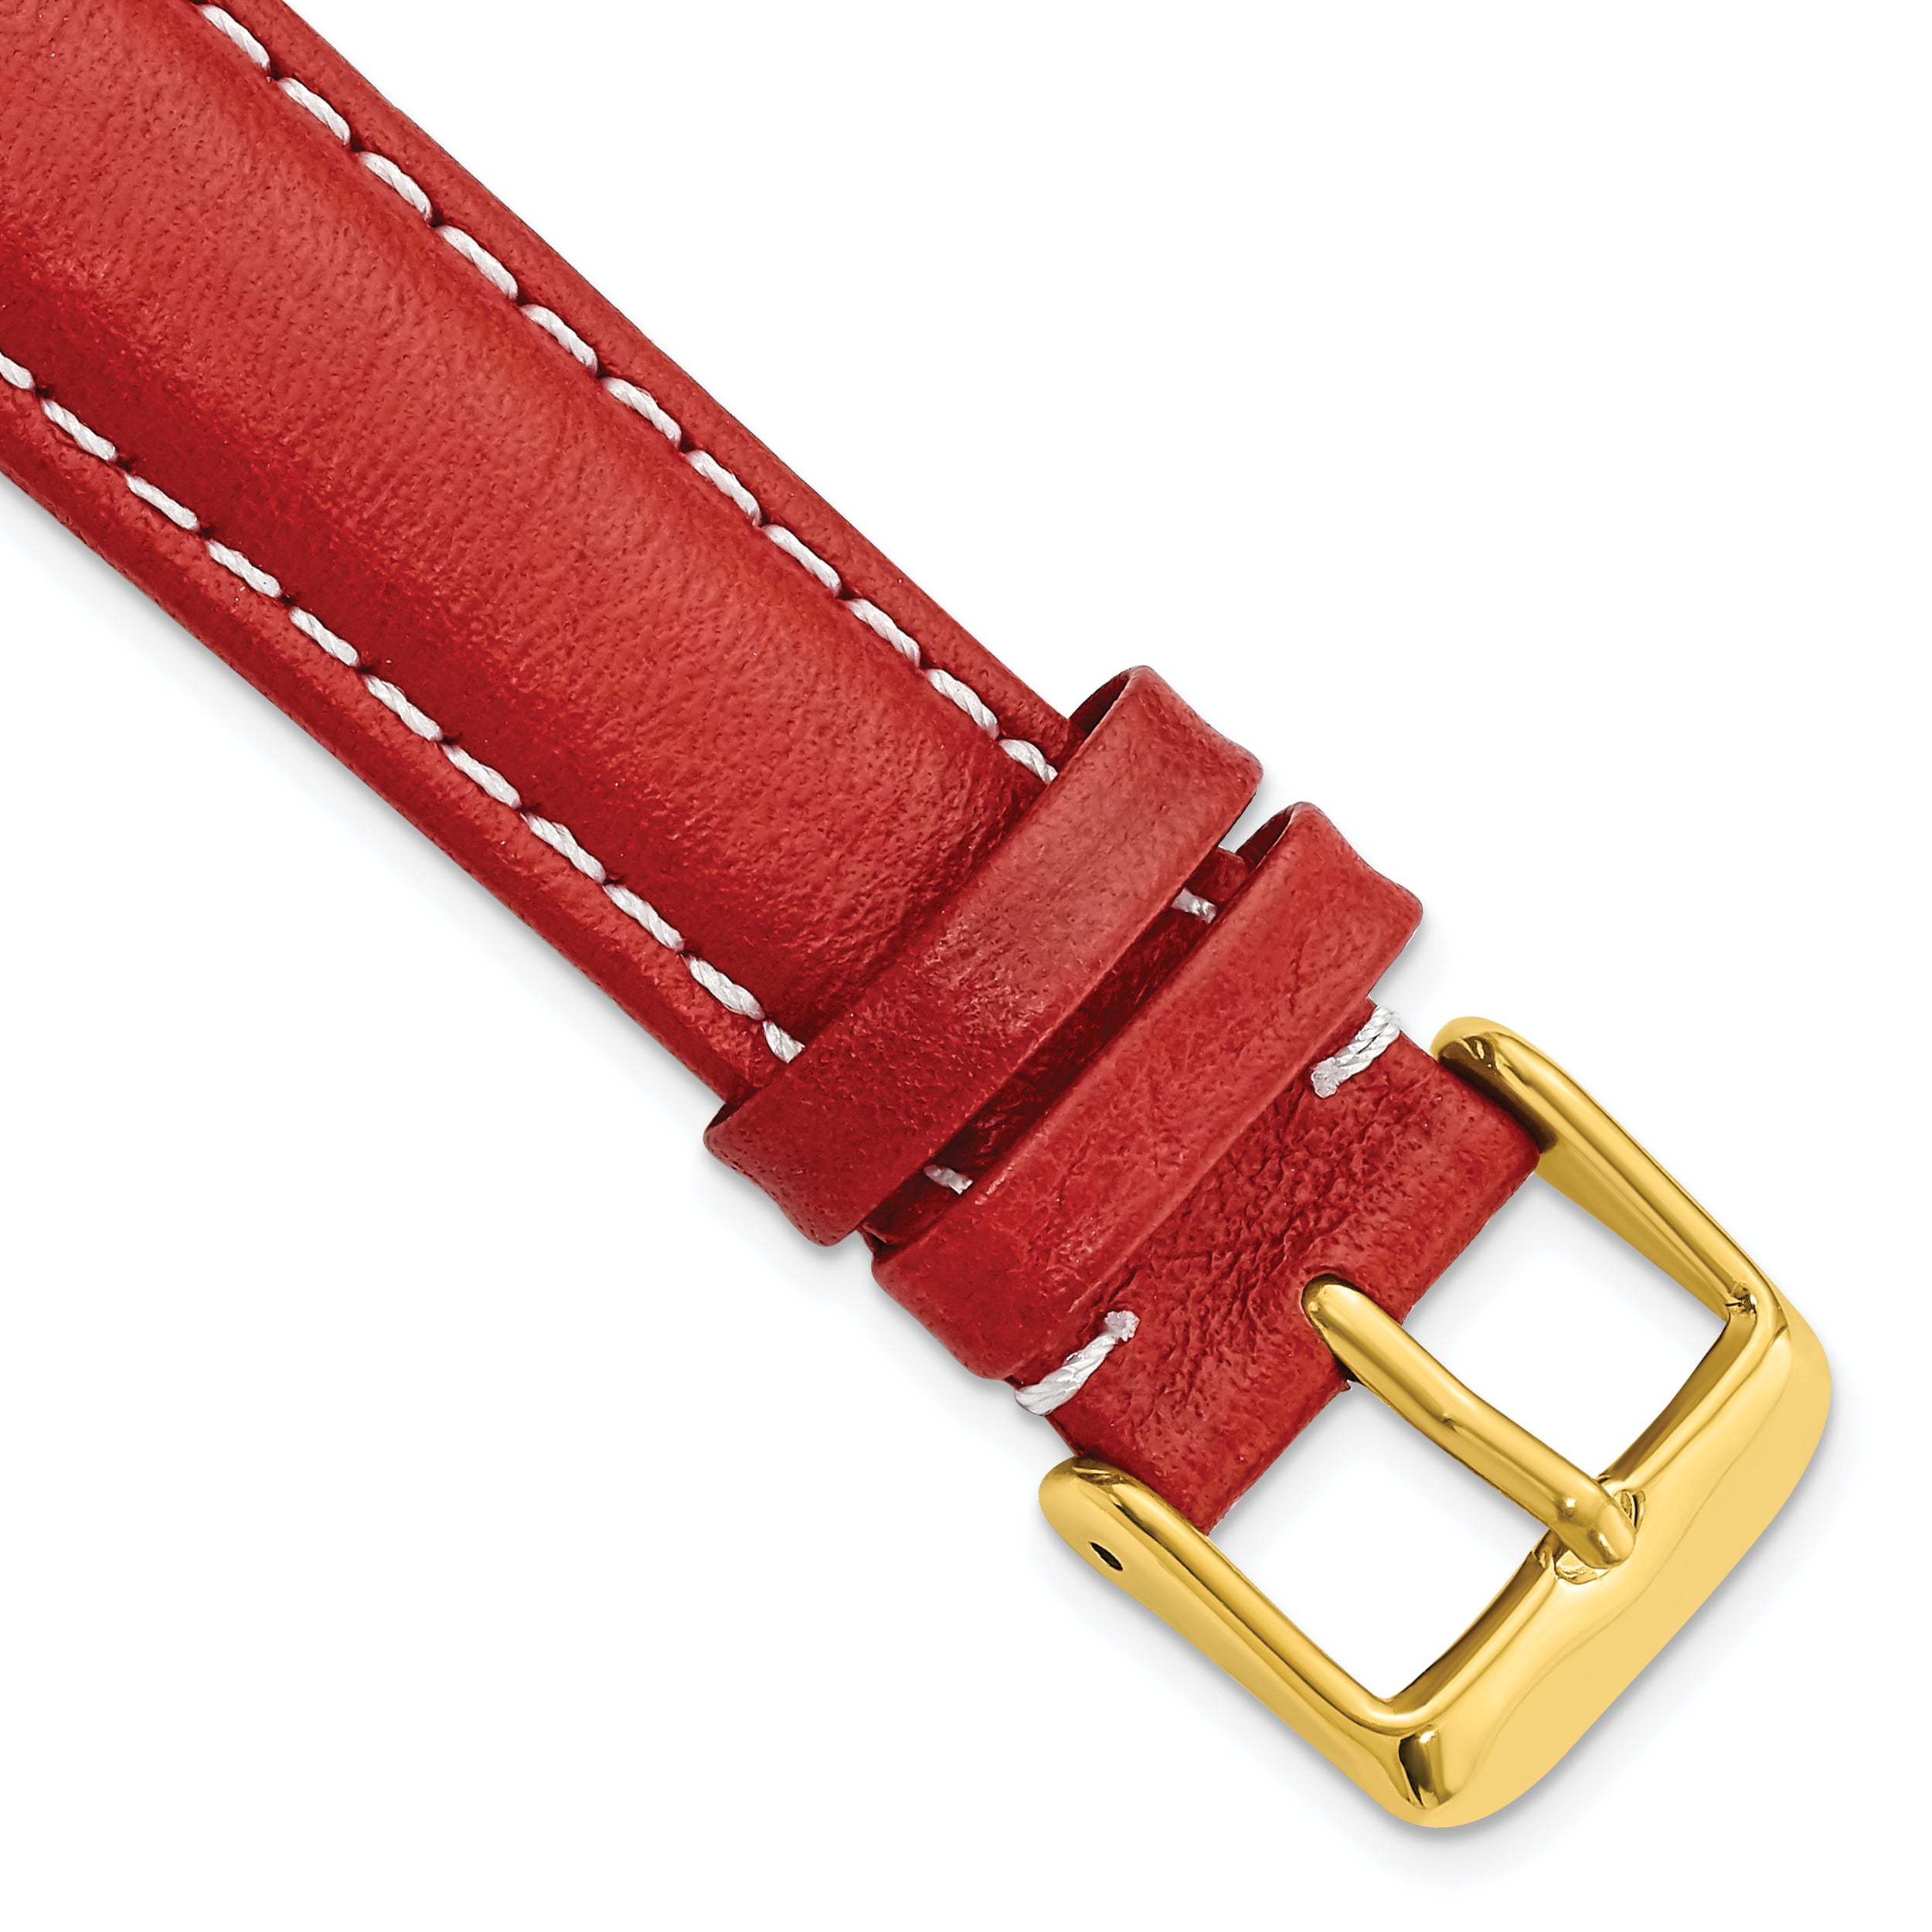 DeBeer 19mm Red Sport Leather with White Stitching and Gold-tone Buckle 7.5 inch Watch Band